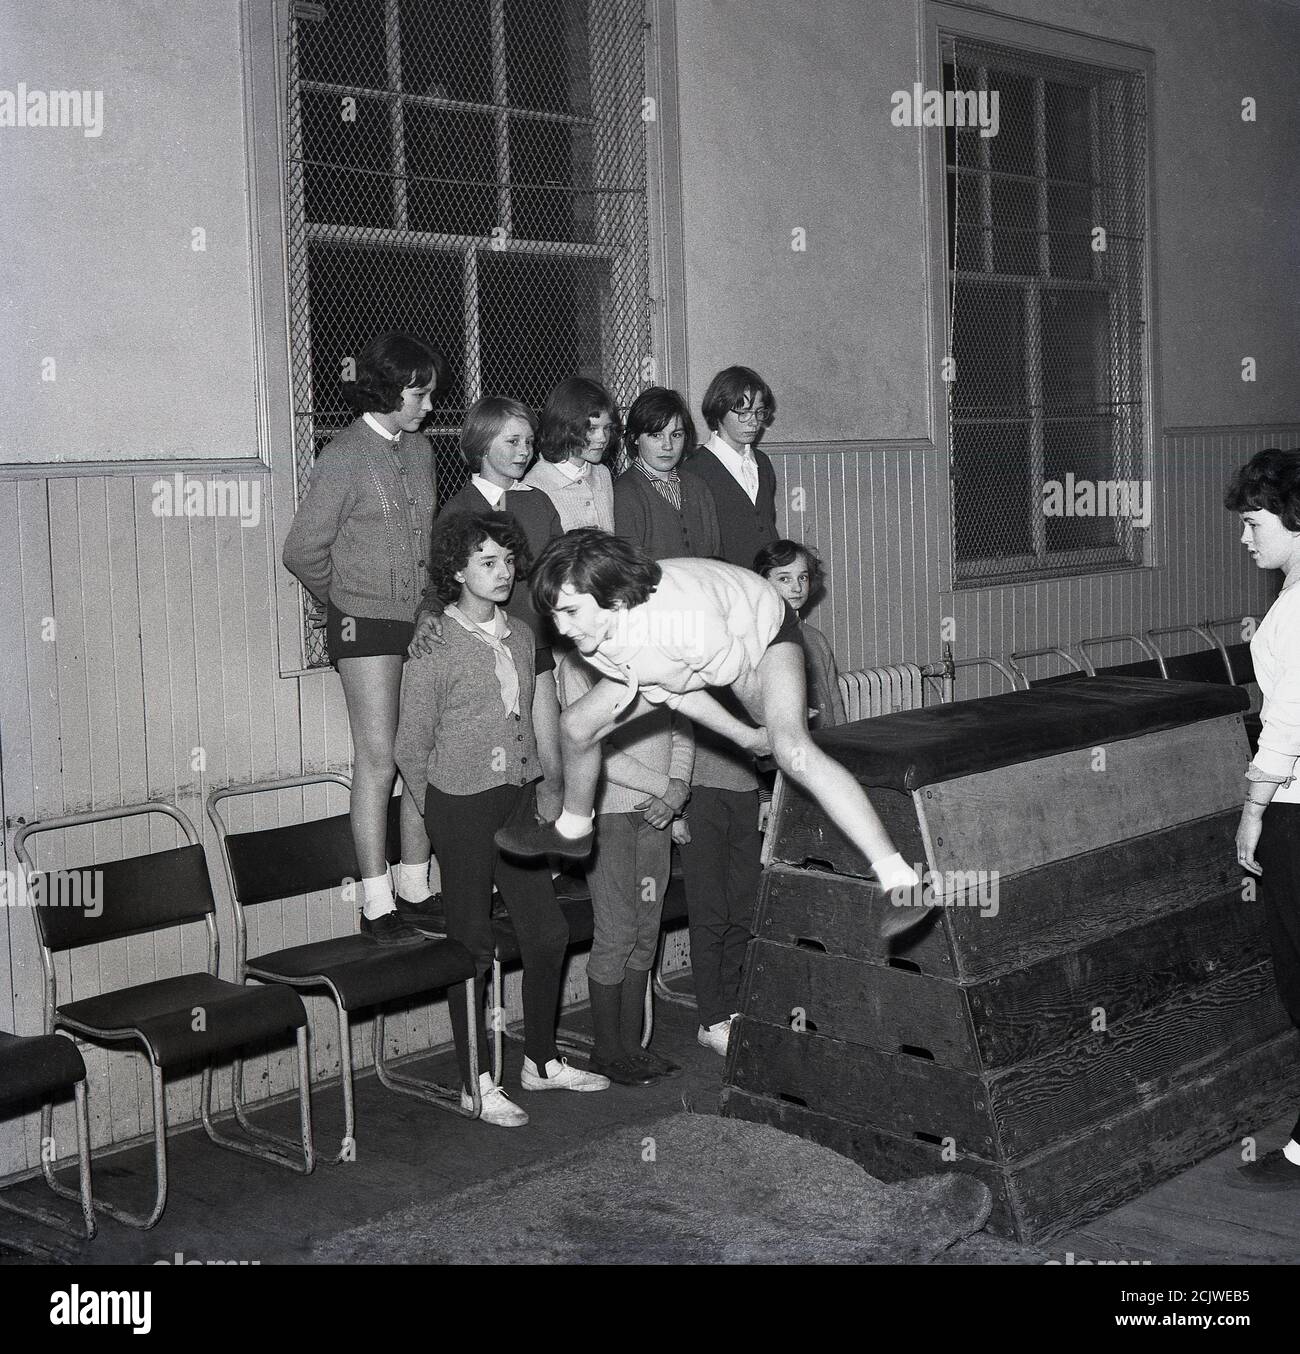 1960s, historical, a girl leaping over a traditional wooden vaulting horse or box inside a youth club, Bowhill, Fife, Scotland, watched by other girls standing on chairs. The girls club movement in Scotland has long roots having started as far back as the 1860s. Youth clubs play an important role in communities giving youngsters a place to play, meet and take part in sporting activities. Stock Photo